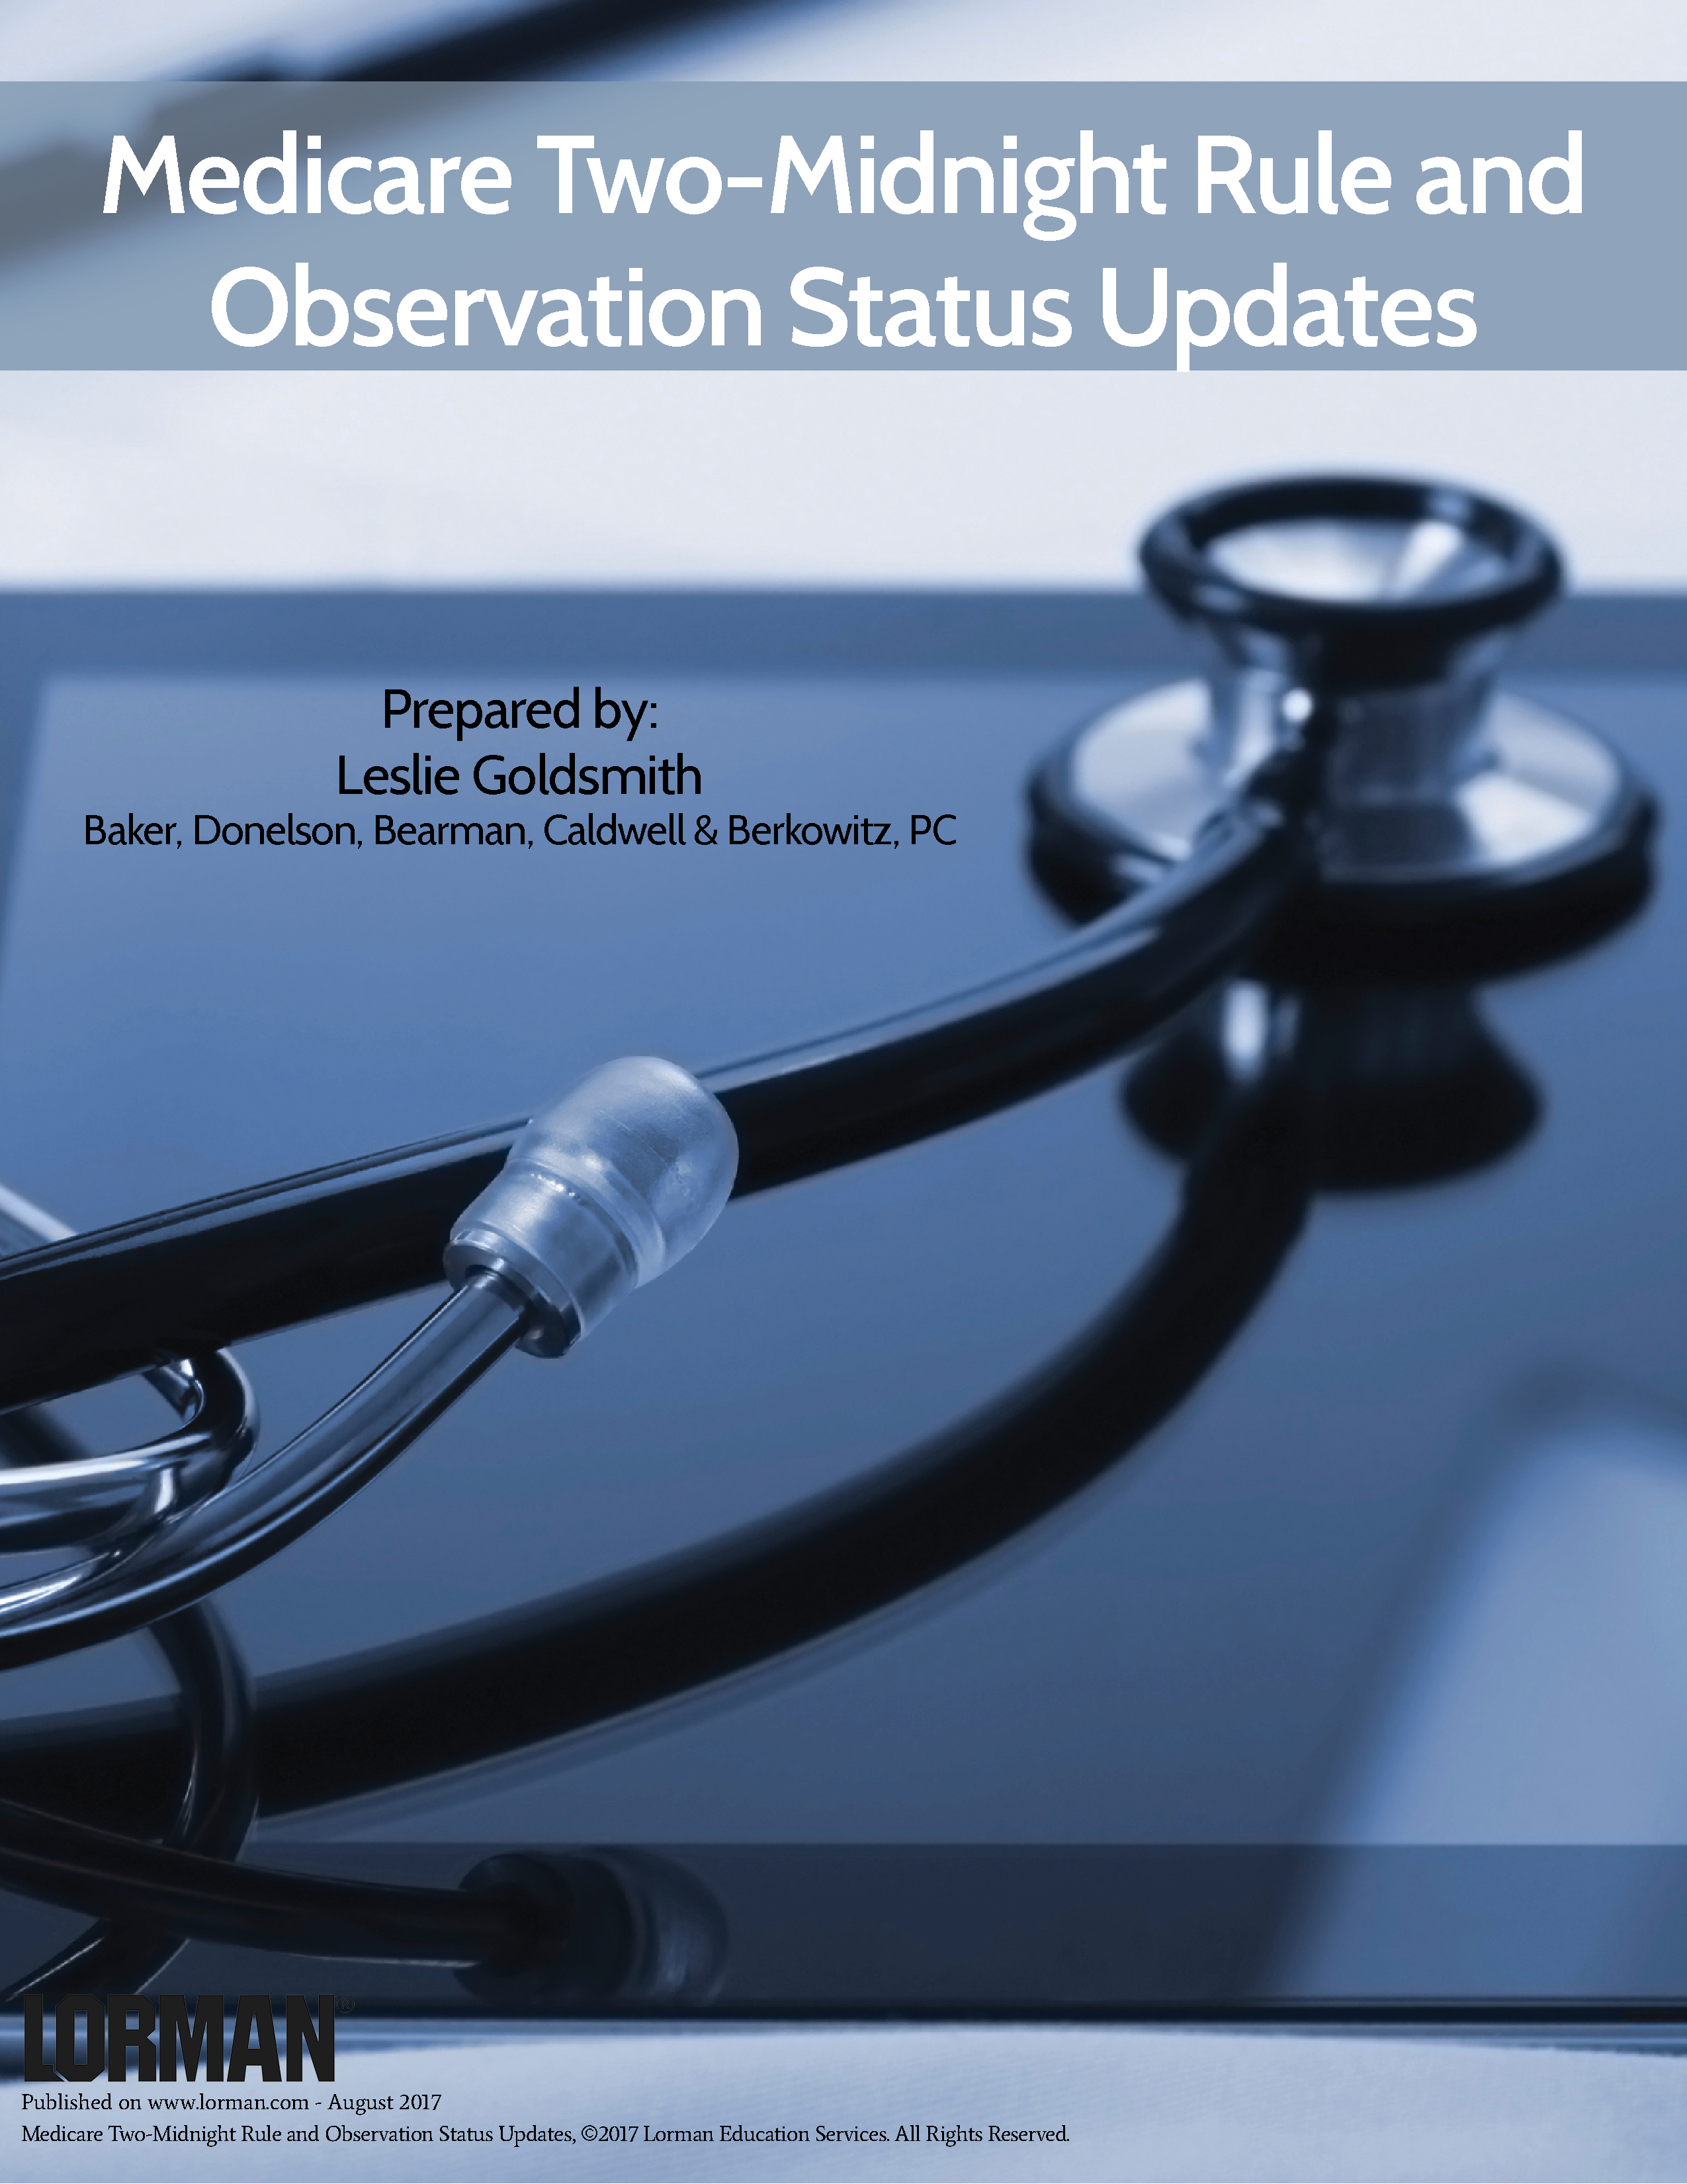 Medicare Two-Midnight Rule and Observation Status Updates